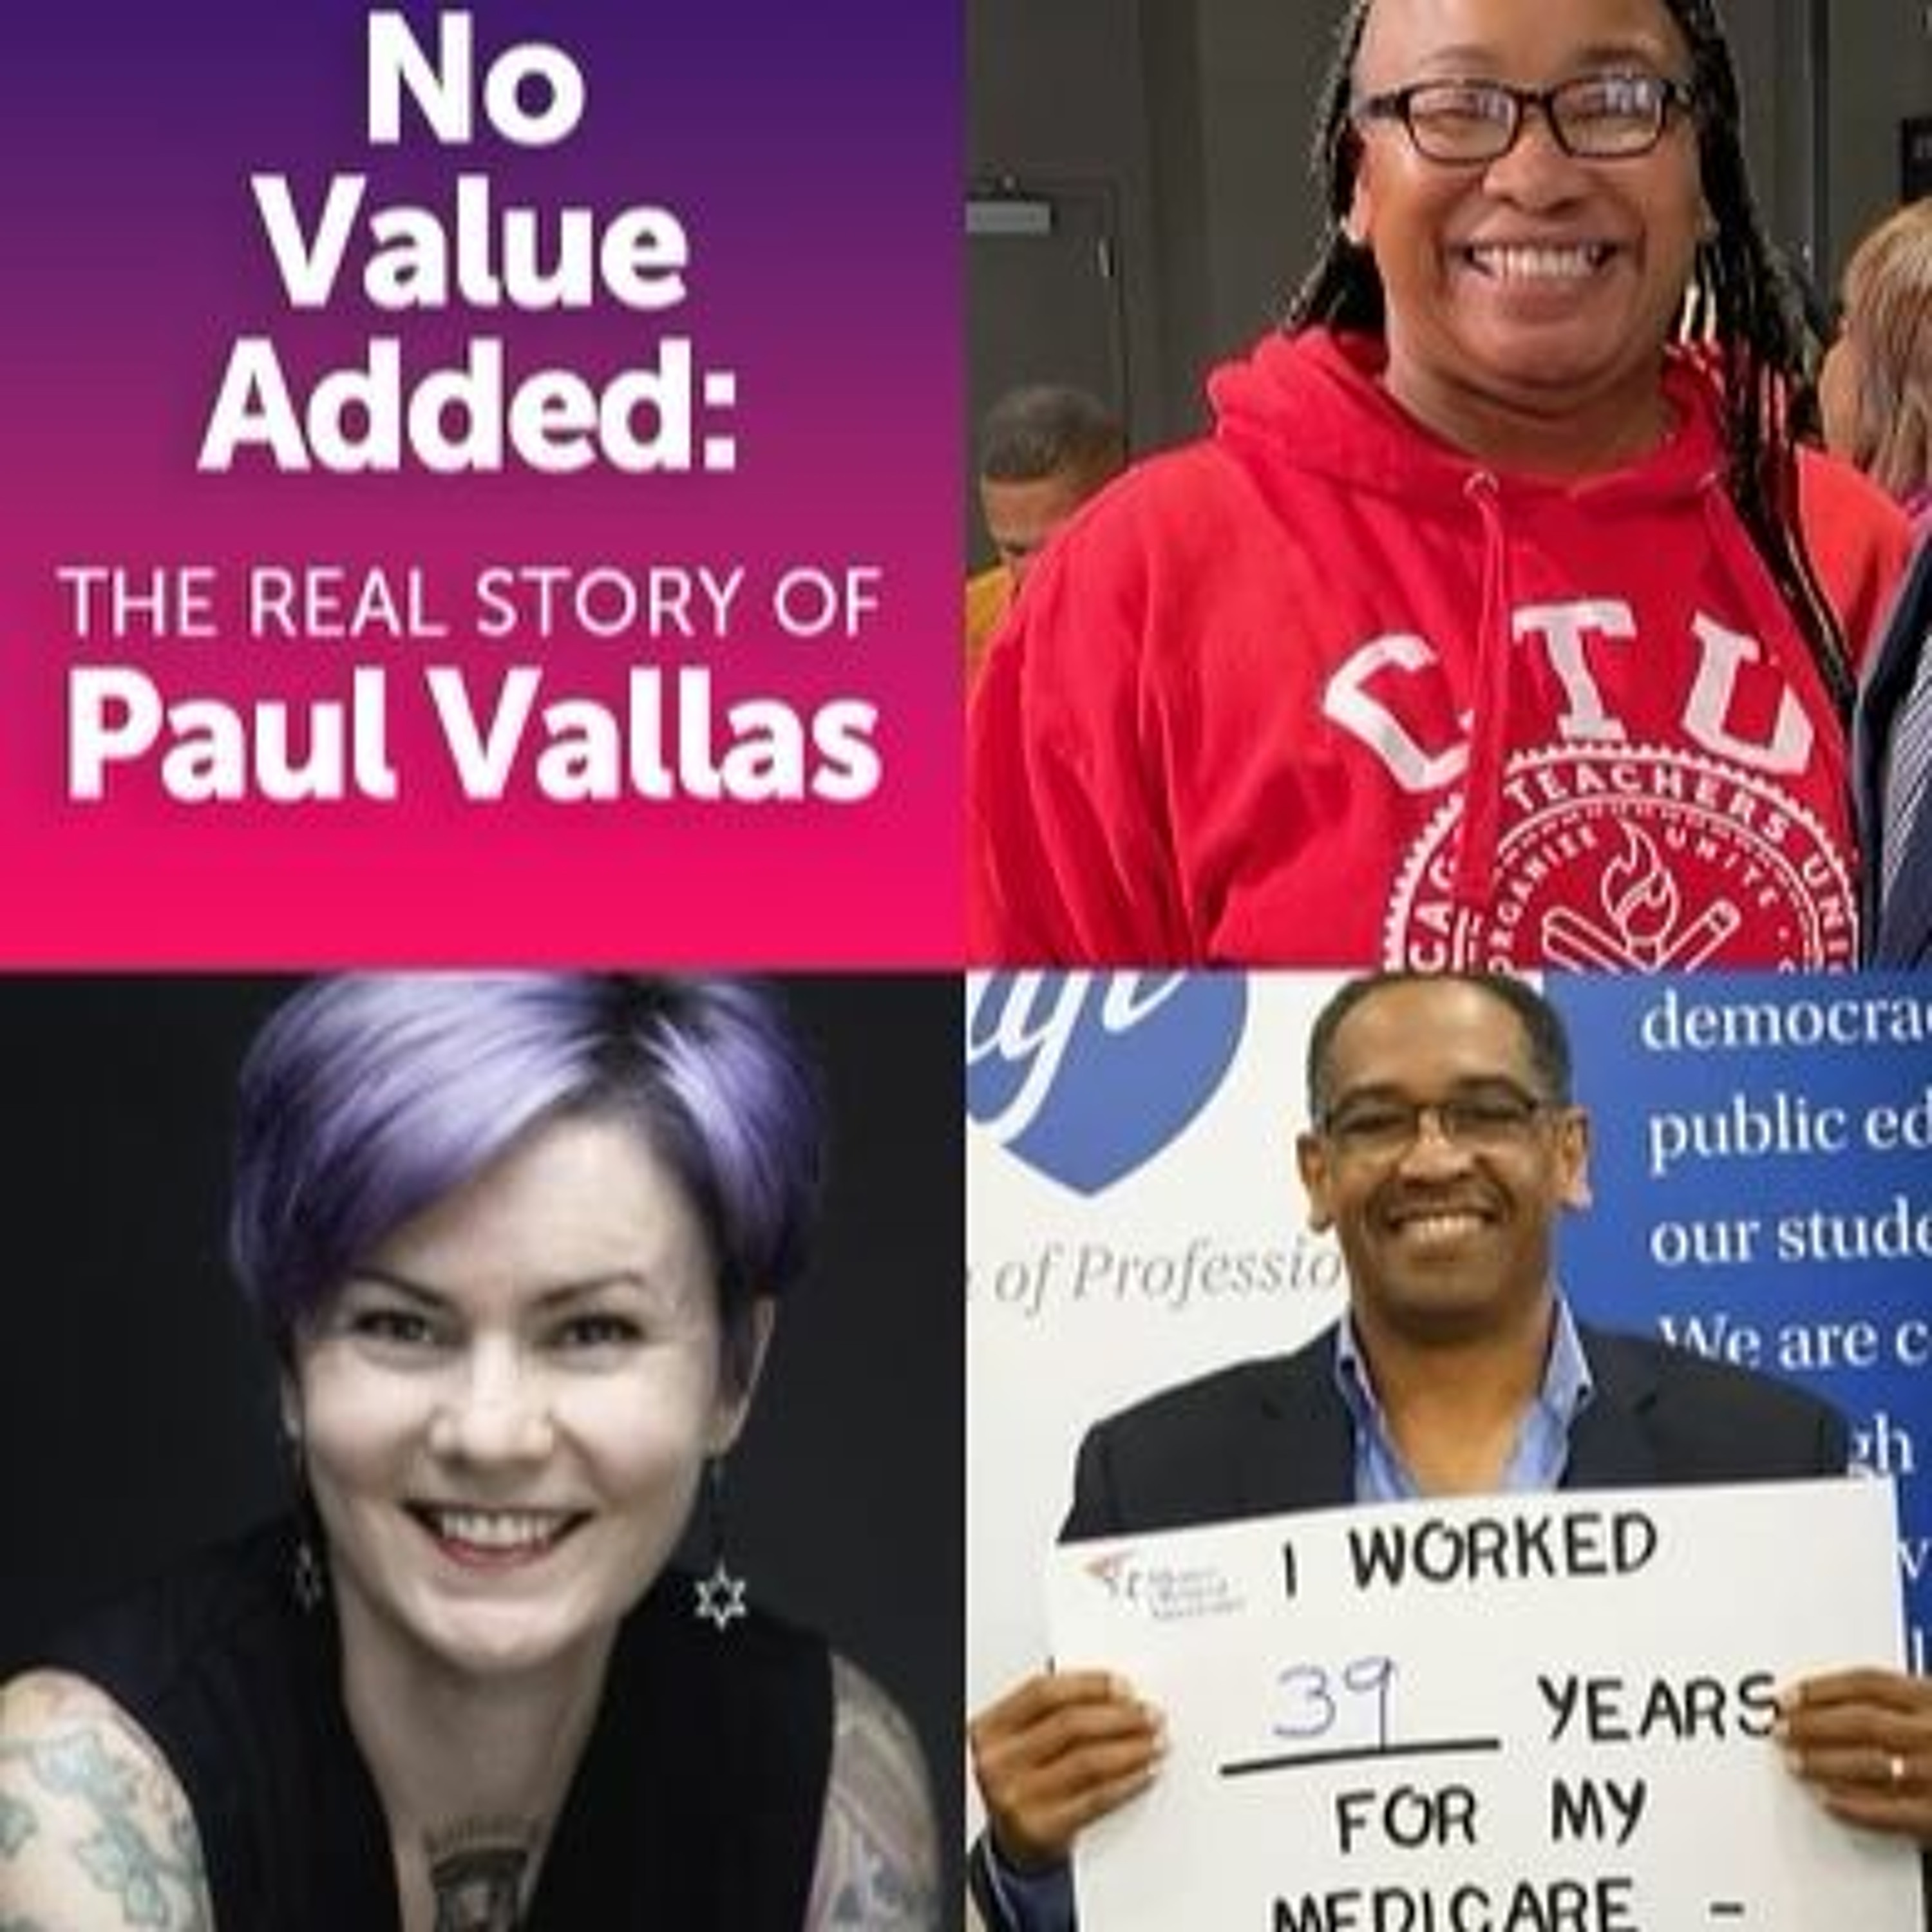 No Value Added: The Real Story of Paul Vallas